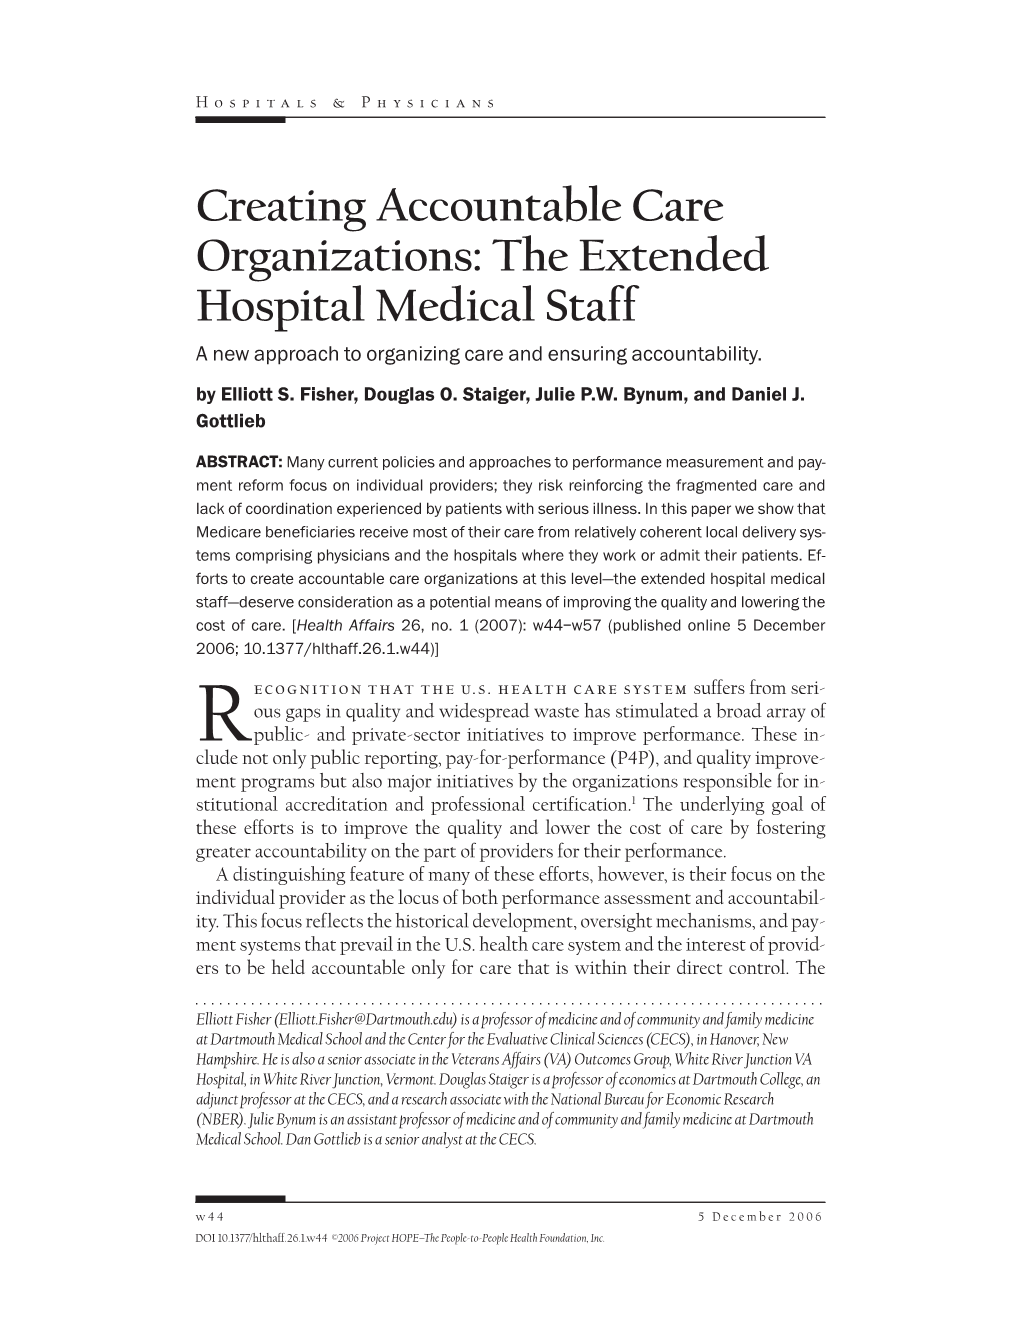 The Extended Hospital Medical Staff a New Approach to Organizing Care and Ensuring Accountability